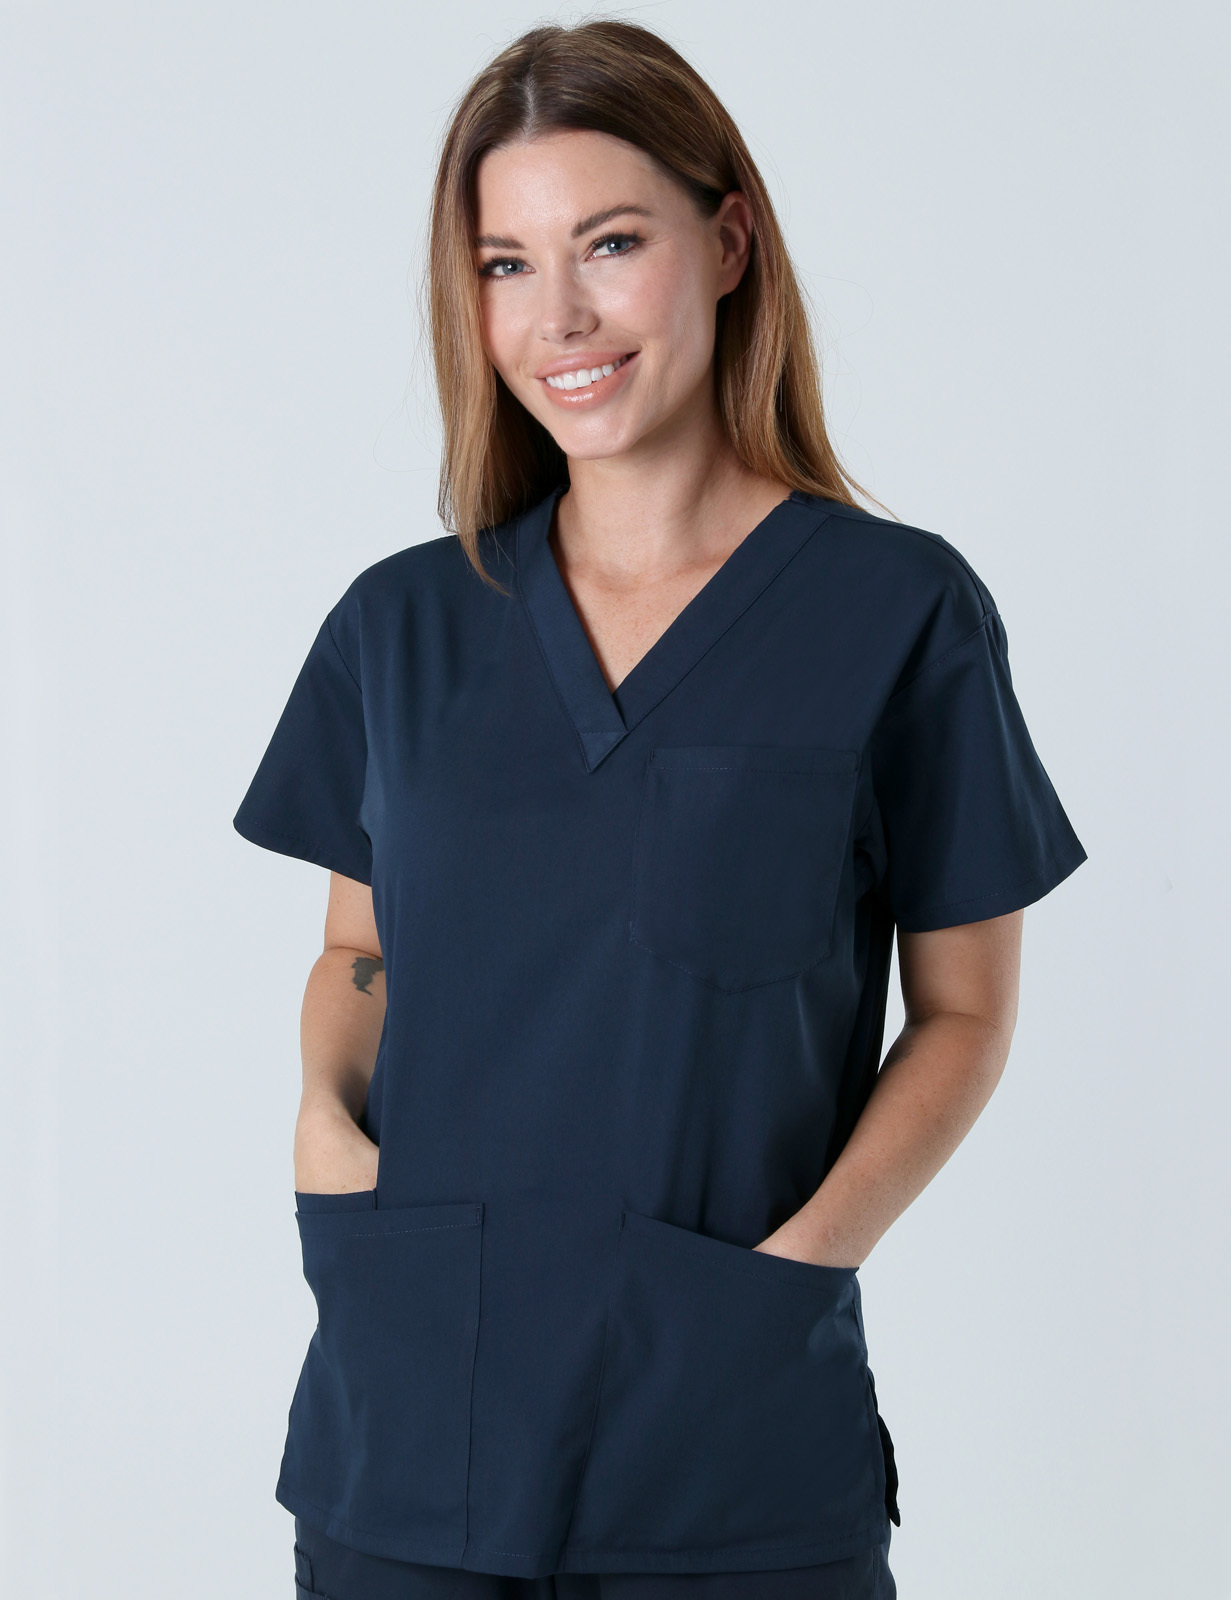 Gladstone Hospital - ED CN (4 Pocket Scrub Top and Cargo Pants in Navy incl Logos)